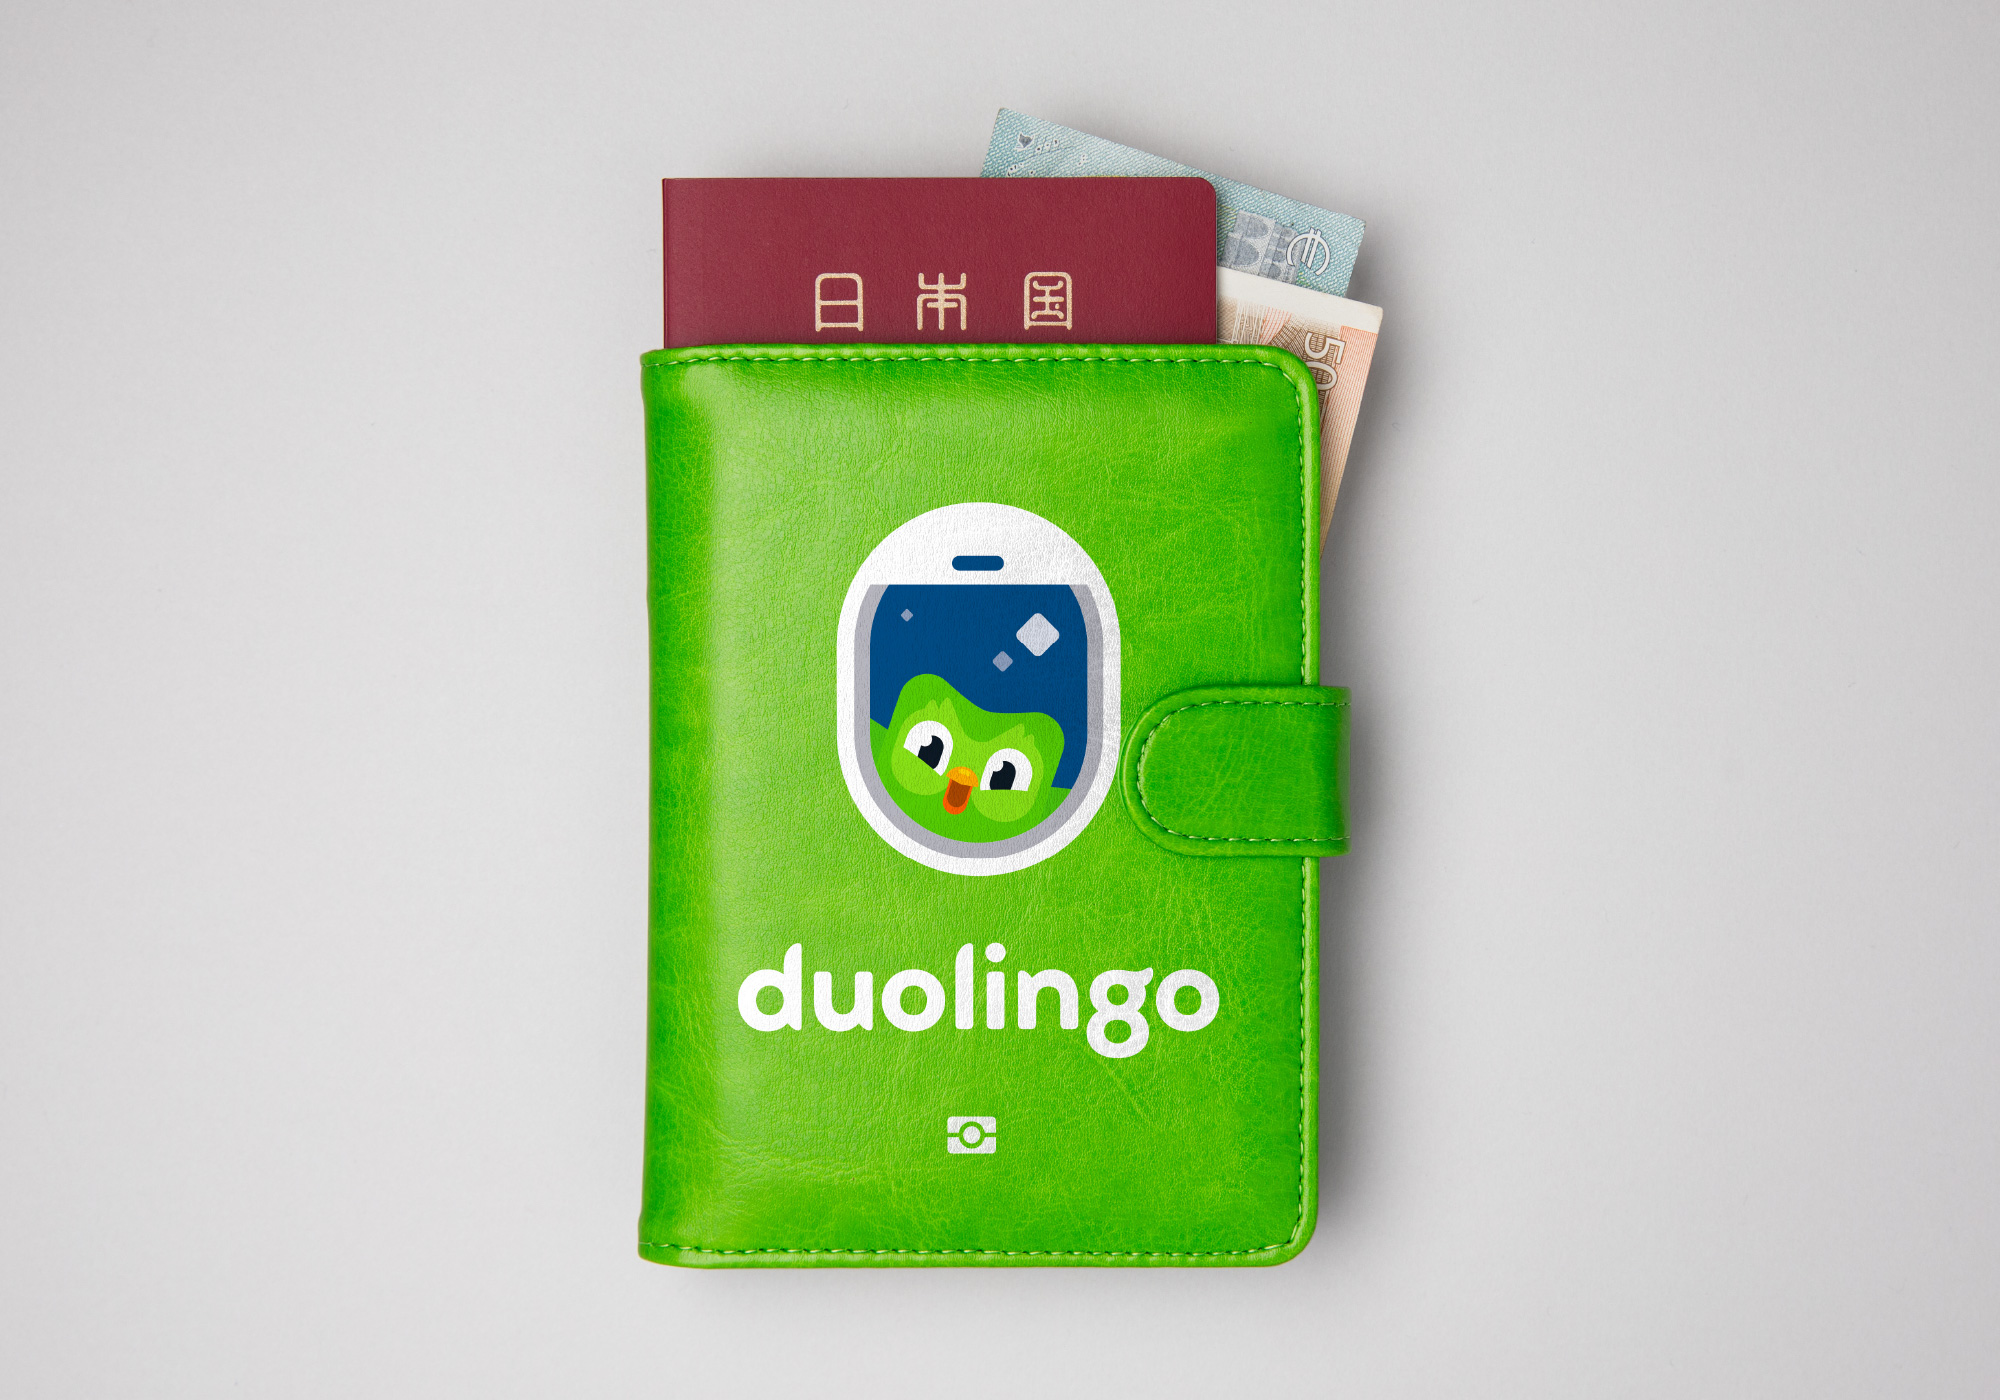 New Wordmark and Identity for Duolingo by Johnson Banks